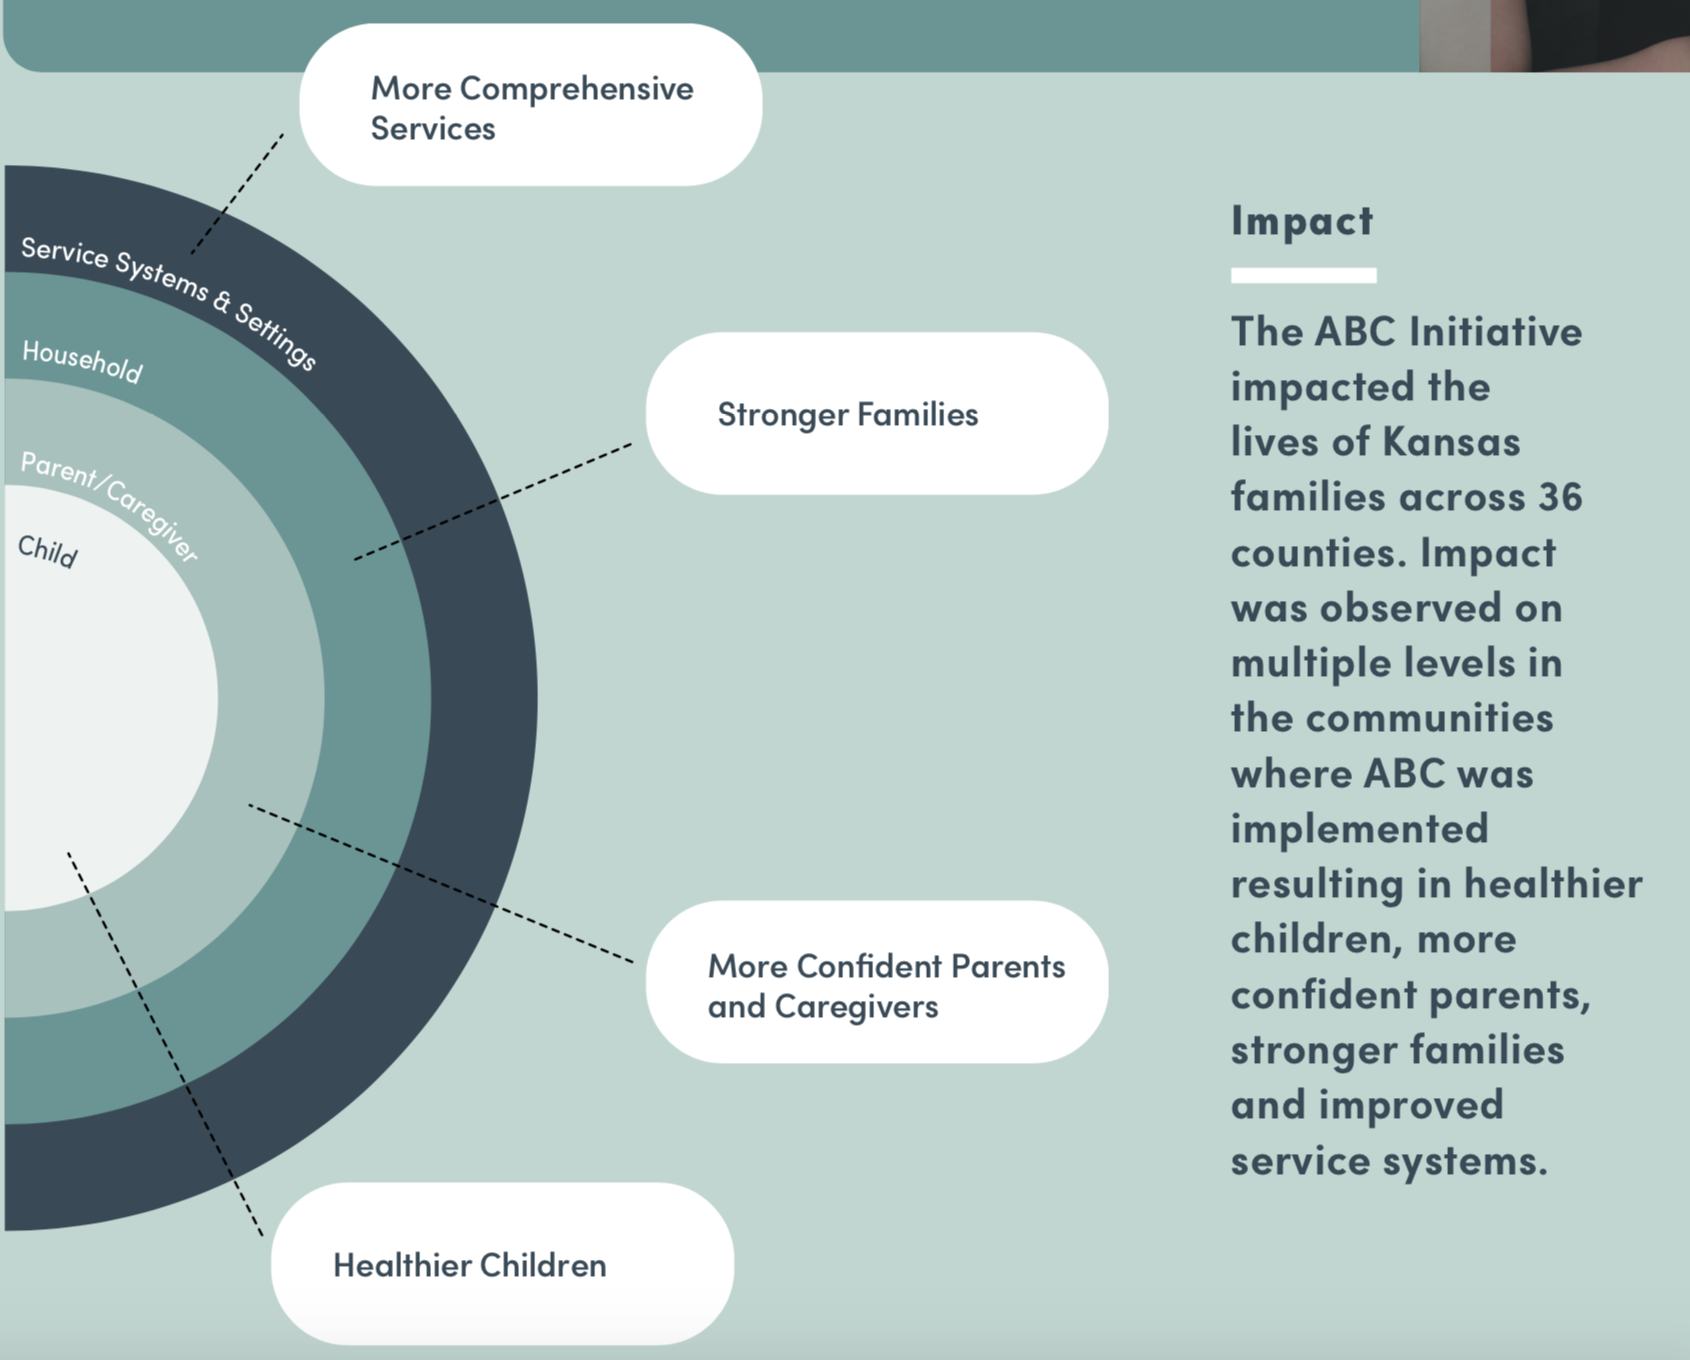 The ABC initiative impacted the lives of Kansas families across 36 counties. Impact was observed on multiple levels in the communities where ABC was implemented resulting in healthier children, more confident parents, stronger families and improved service systems.